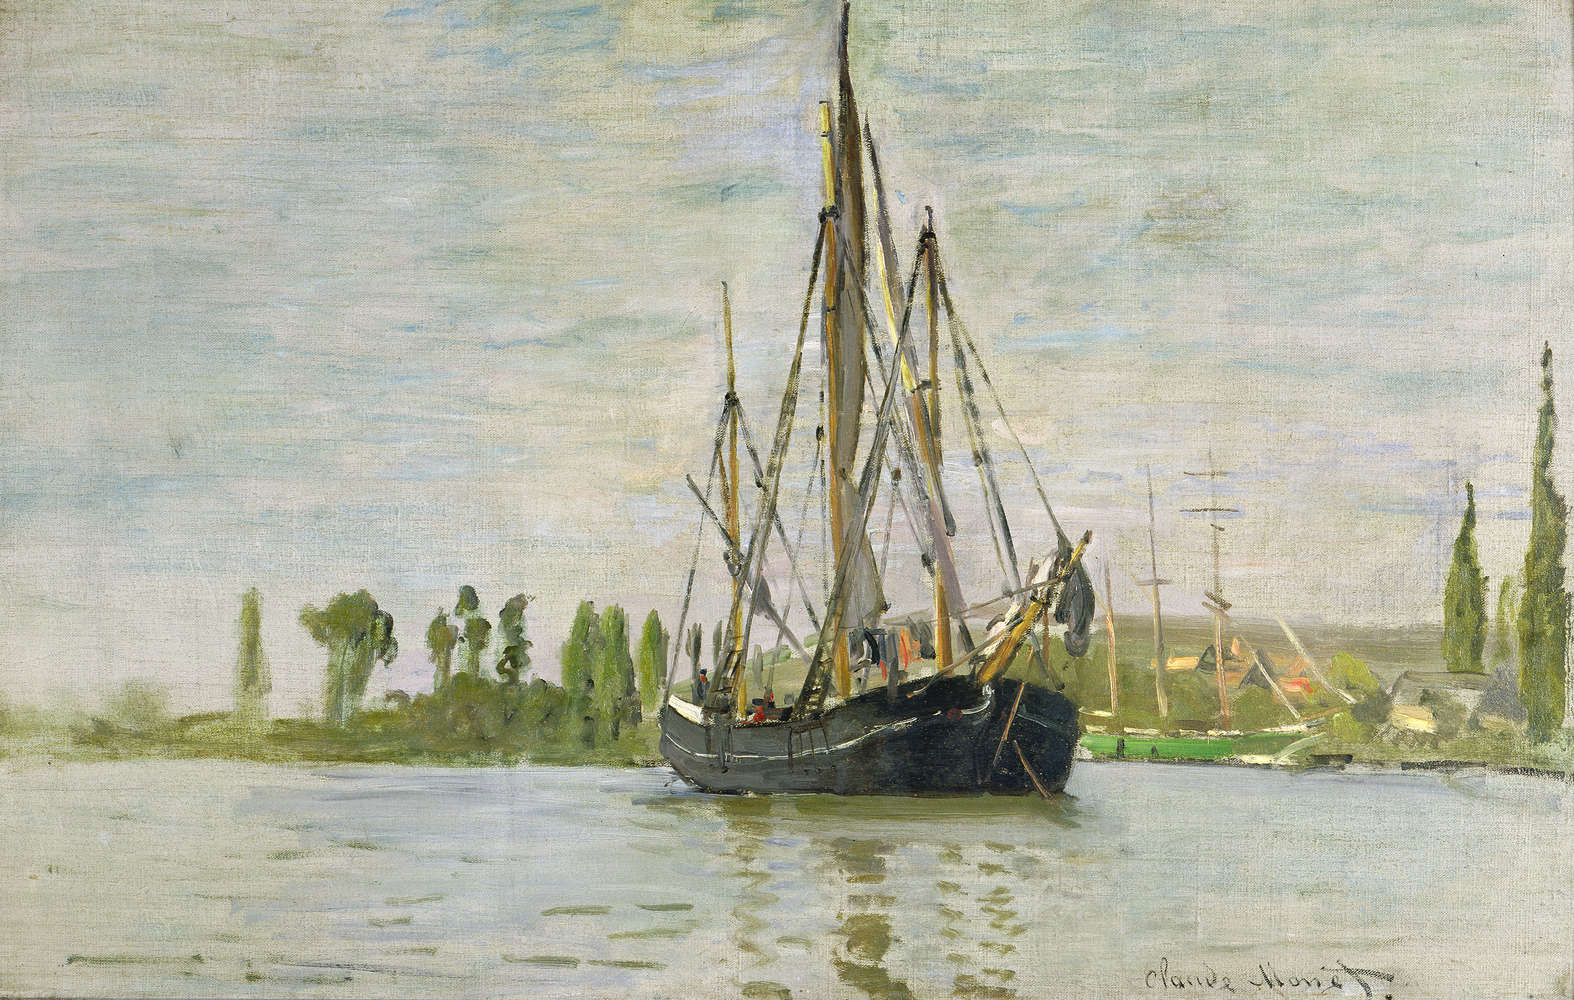             Photo wallpaper "The Chasse-Marée at anchor" by Claude Monet
        